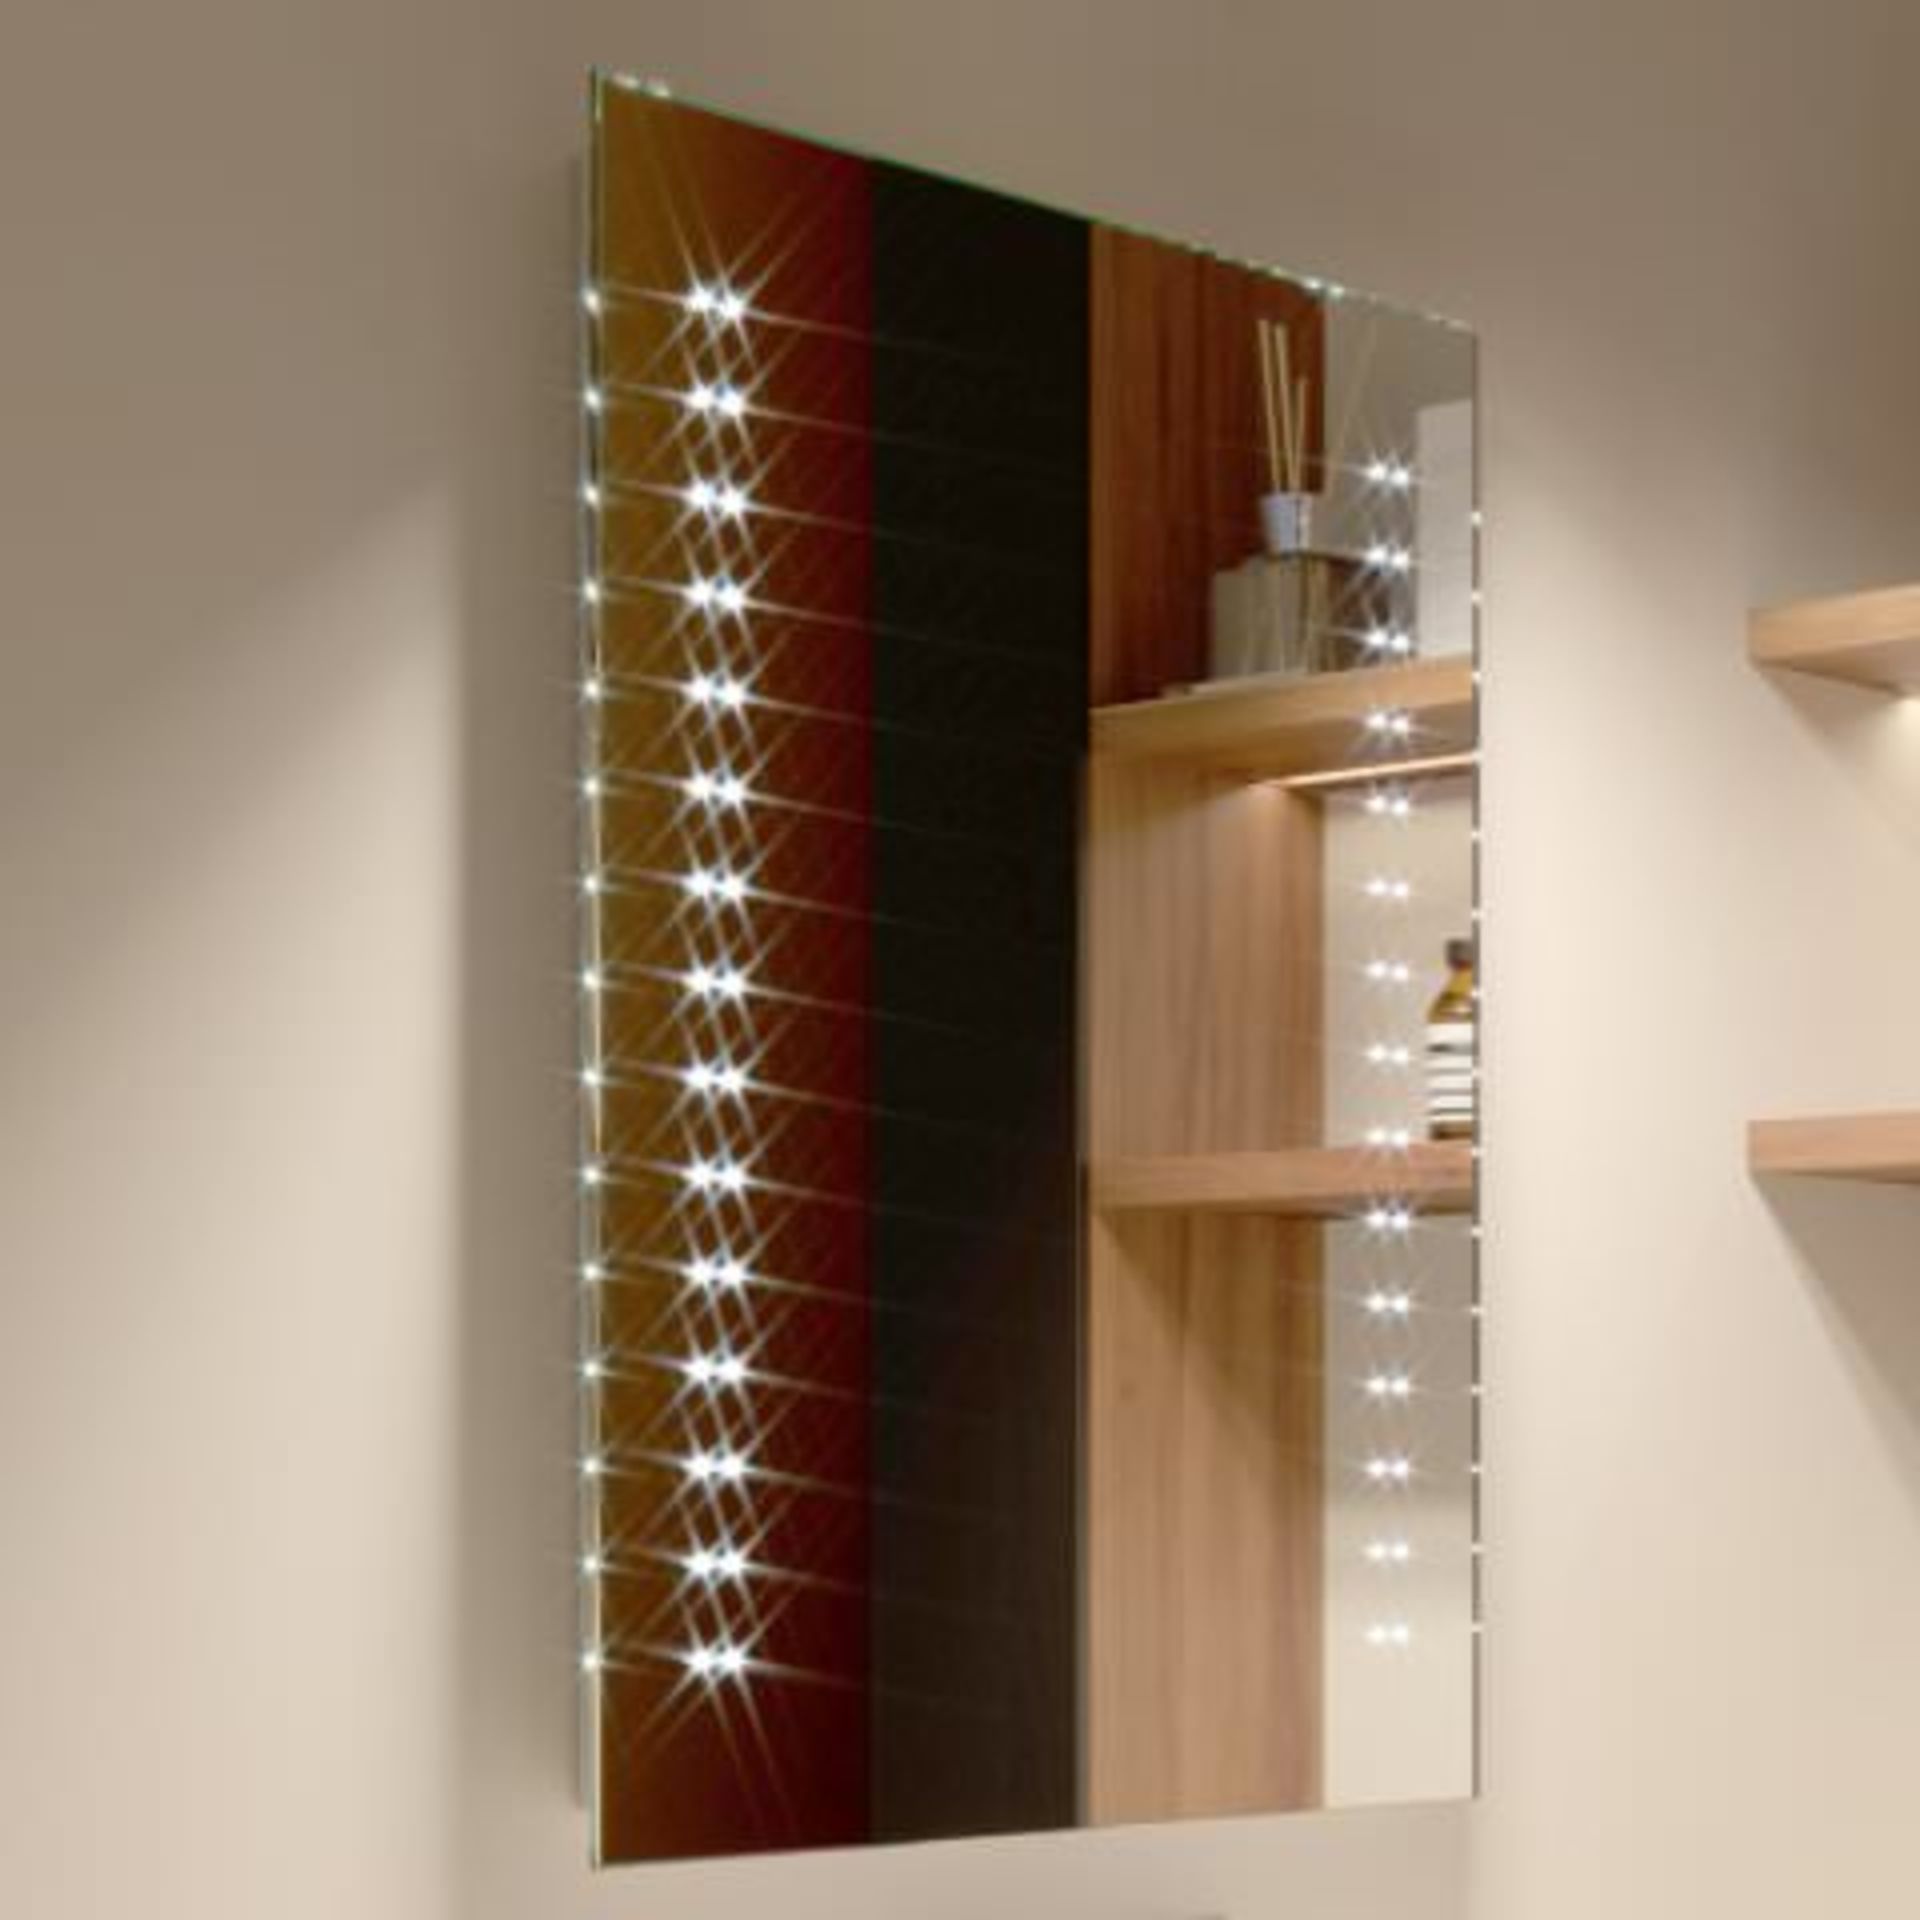 (H111) 500x700mm Galactic LED Mirror - Battery Operated. RRP £199.99. Our ultra-flattering LED